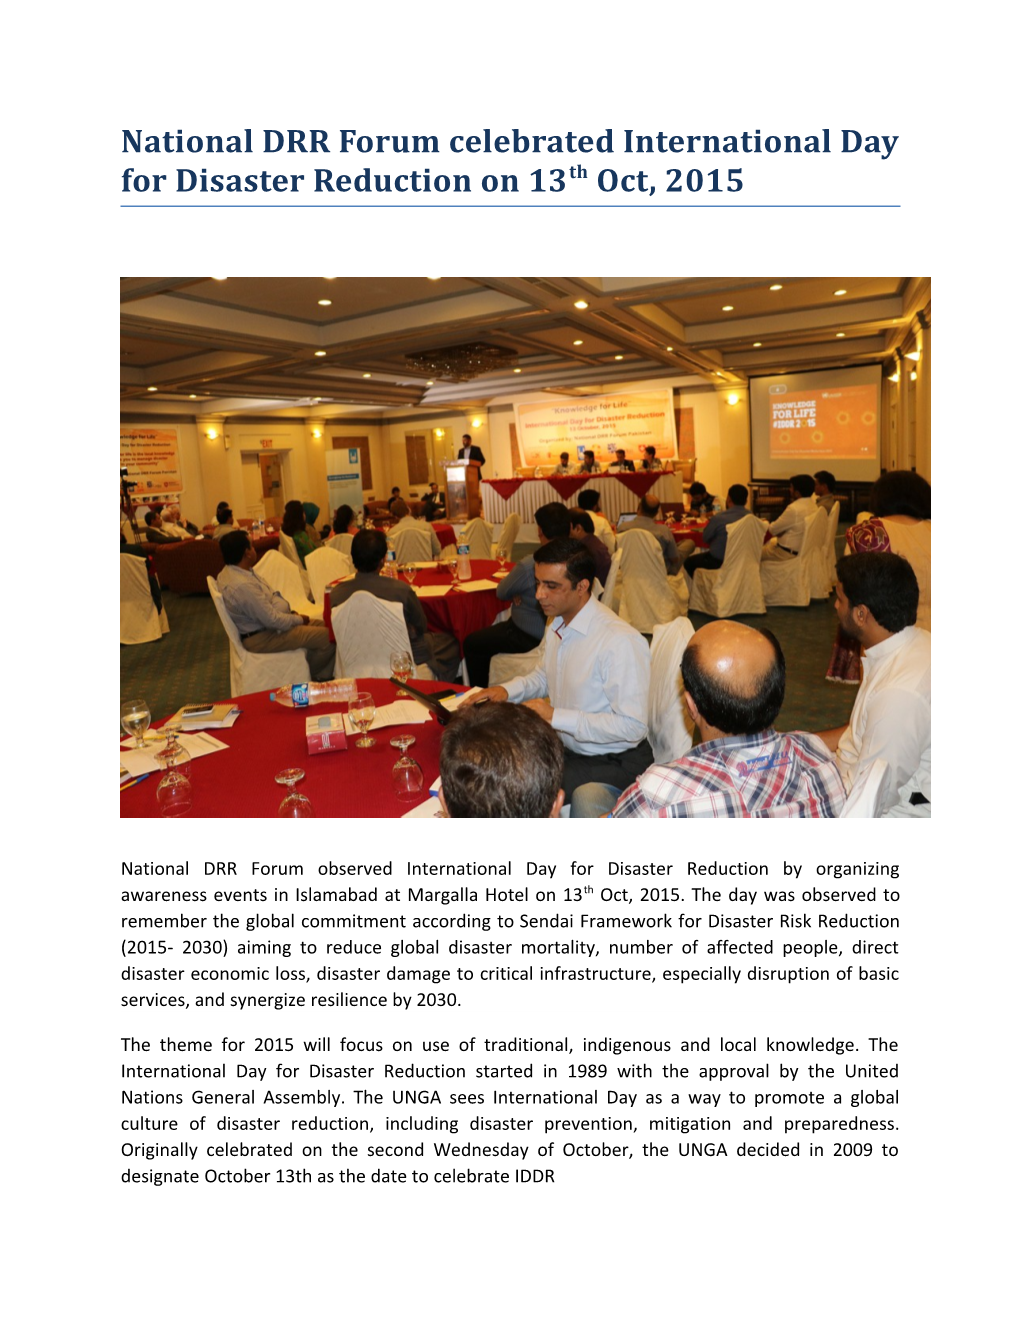 National DRR Forum Celebrated International Day for Disaster Reduction on 13Th Oct, 2015